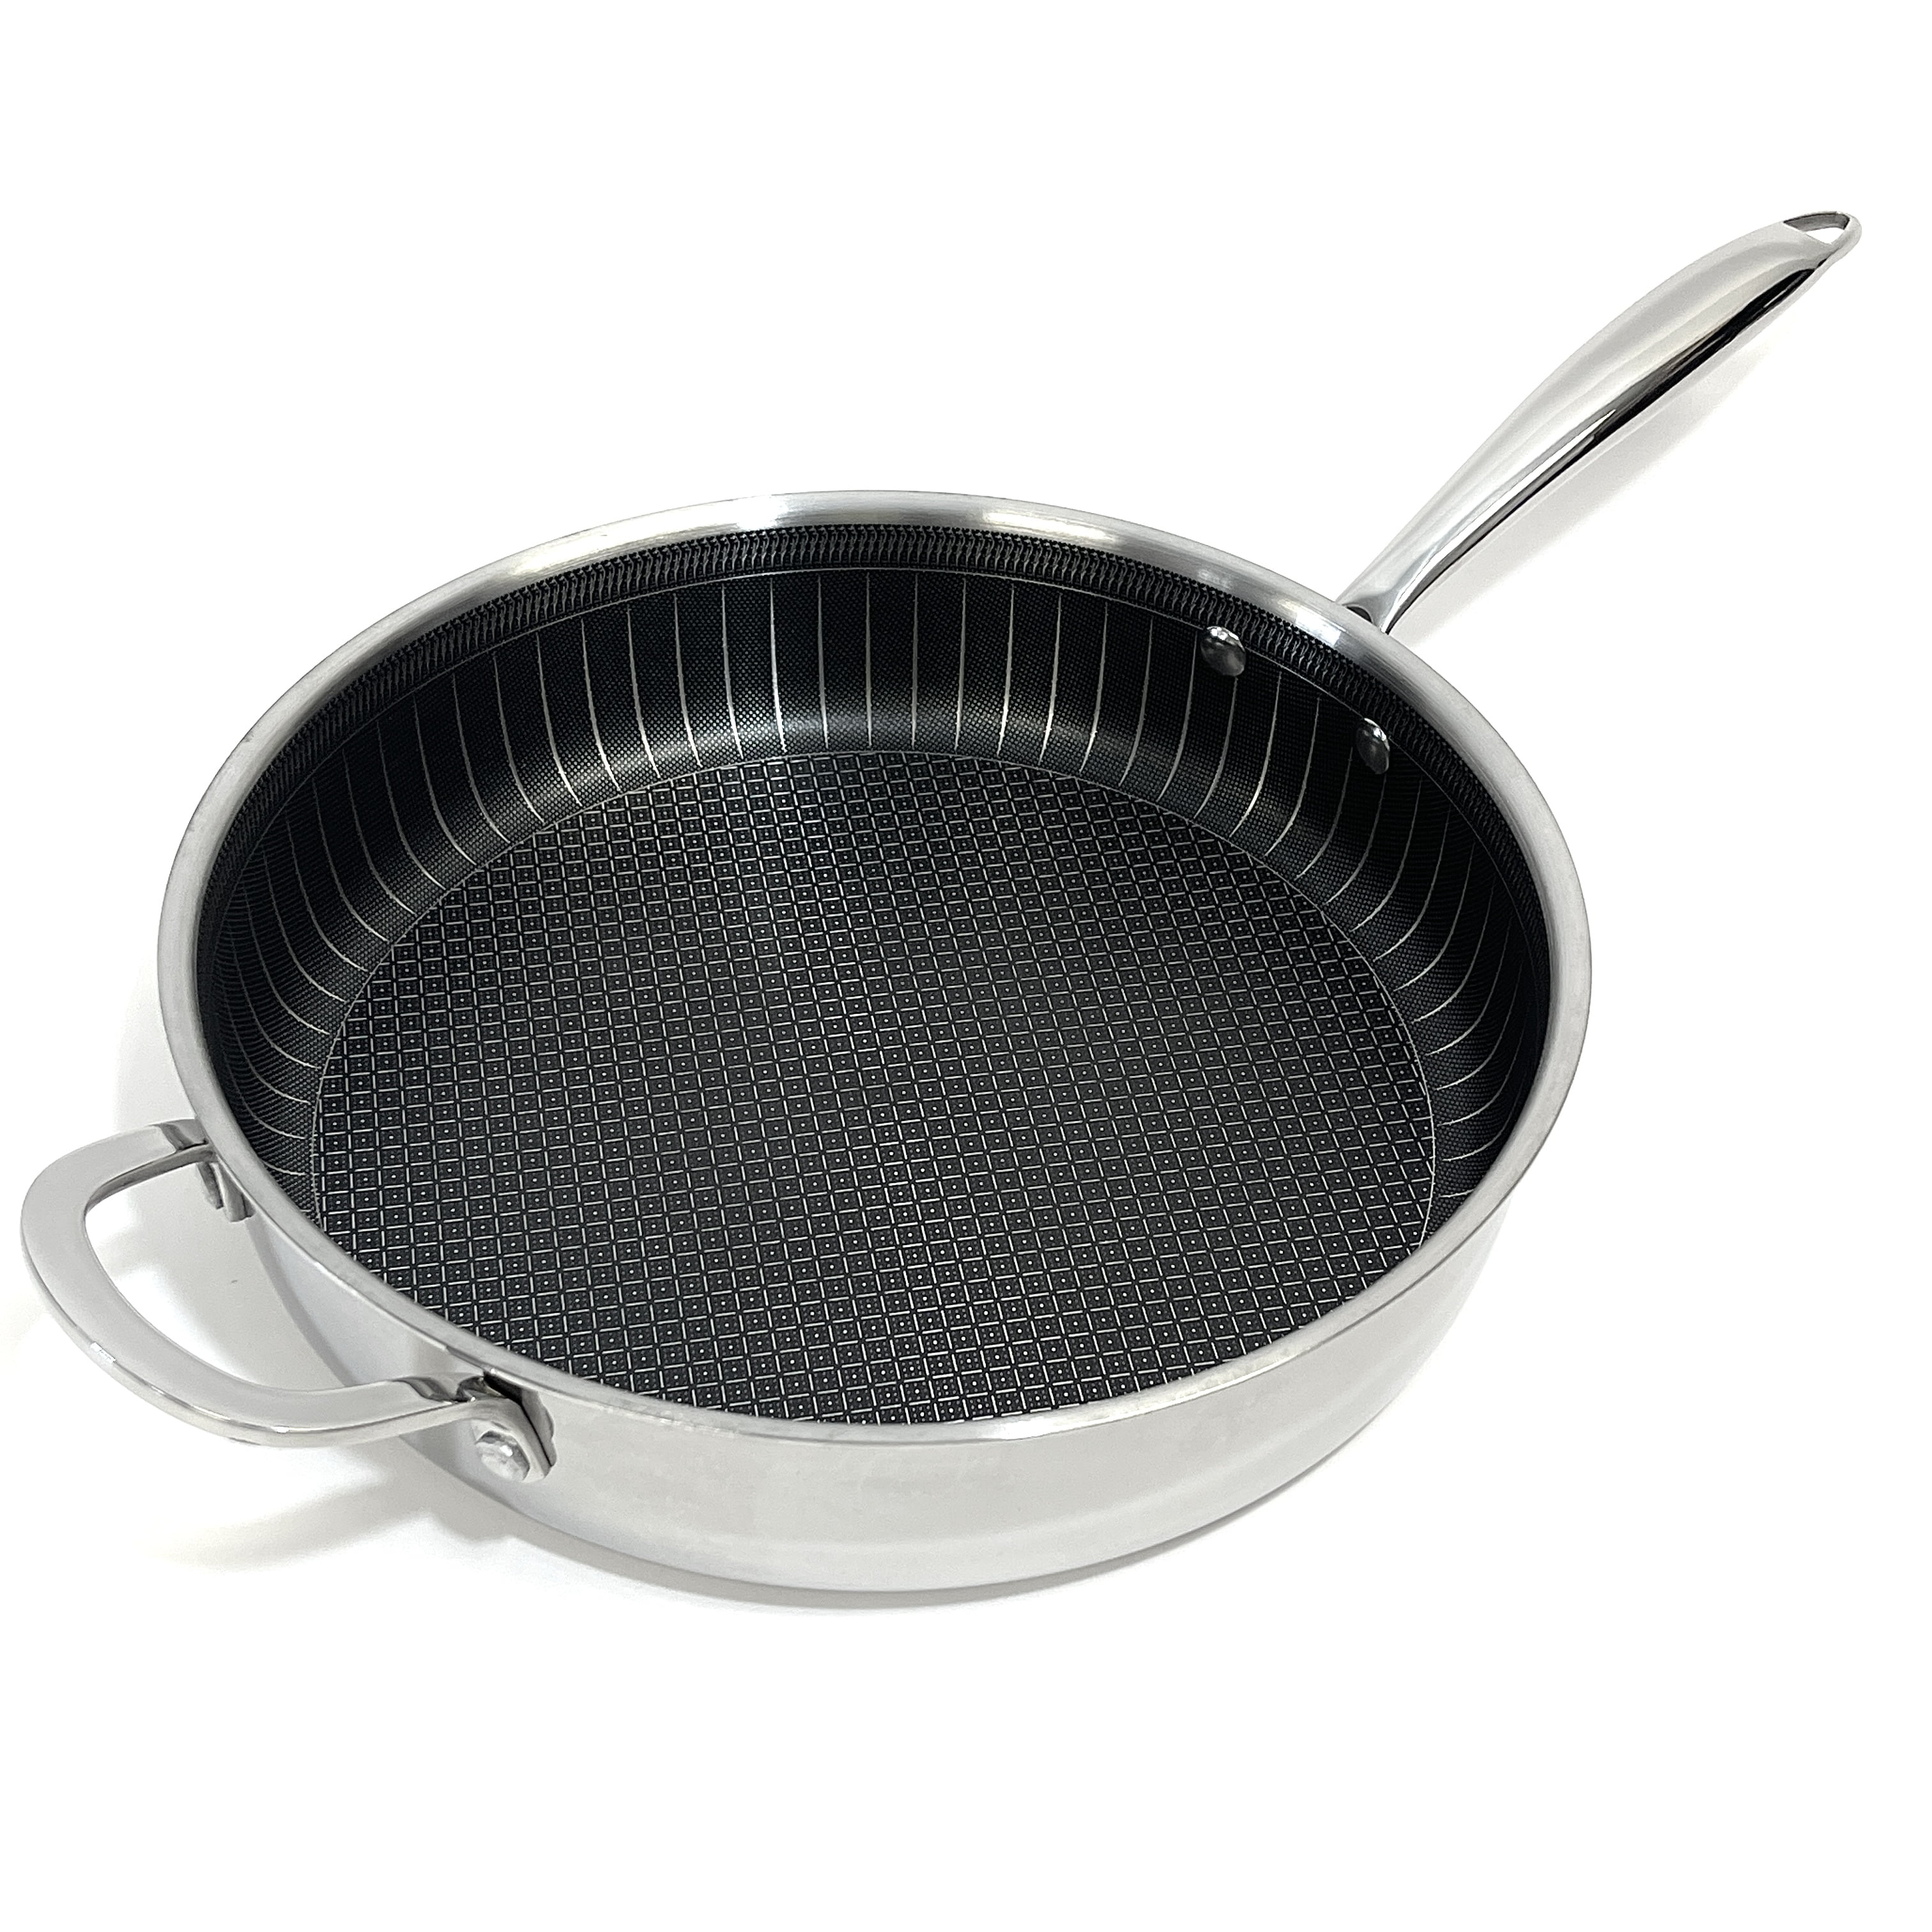 mueller home Mueller DuraClad Tri-Ply Stainless Steel 8-Inch Fry Pan with  Lid, Extra Strong Cookware, 3-layer Bottom, Even Heat Distribution